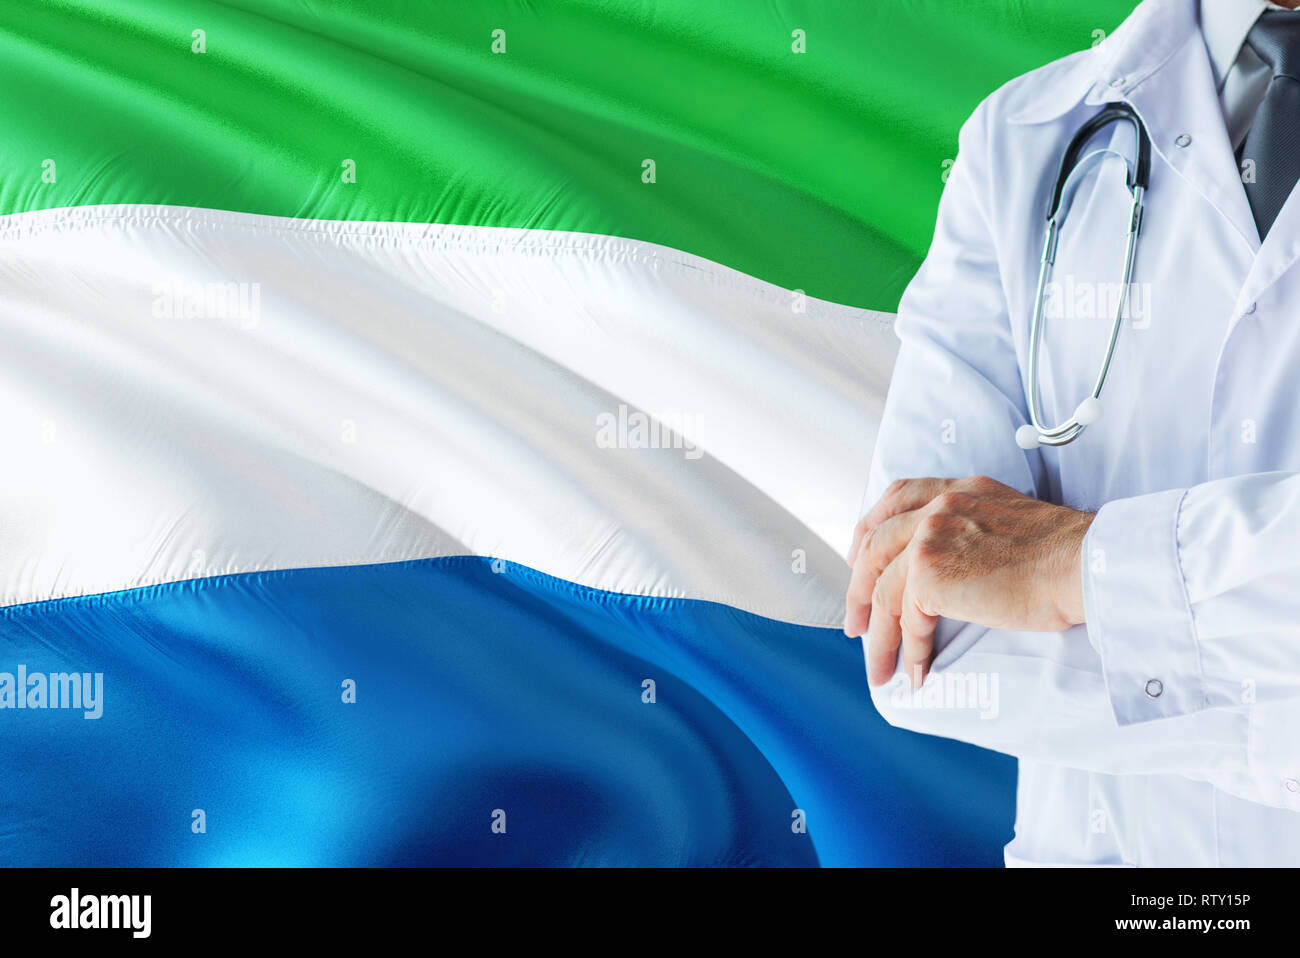 Sierra Leonean Doctor standing with stethoscope on Sierra Leone flag  background. National healthcare system concept, medical theme Stock Photo -  Alamy